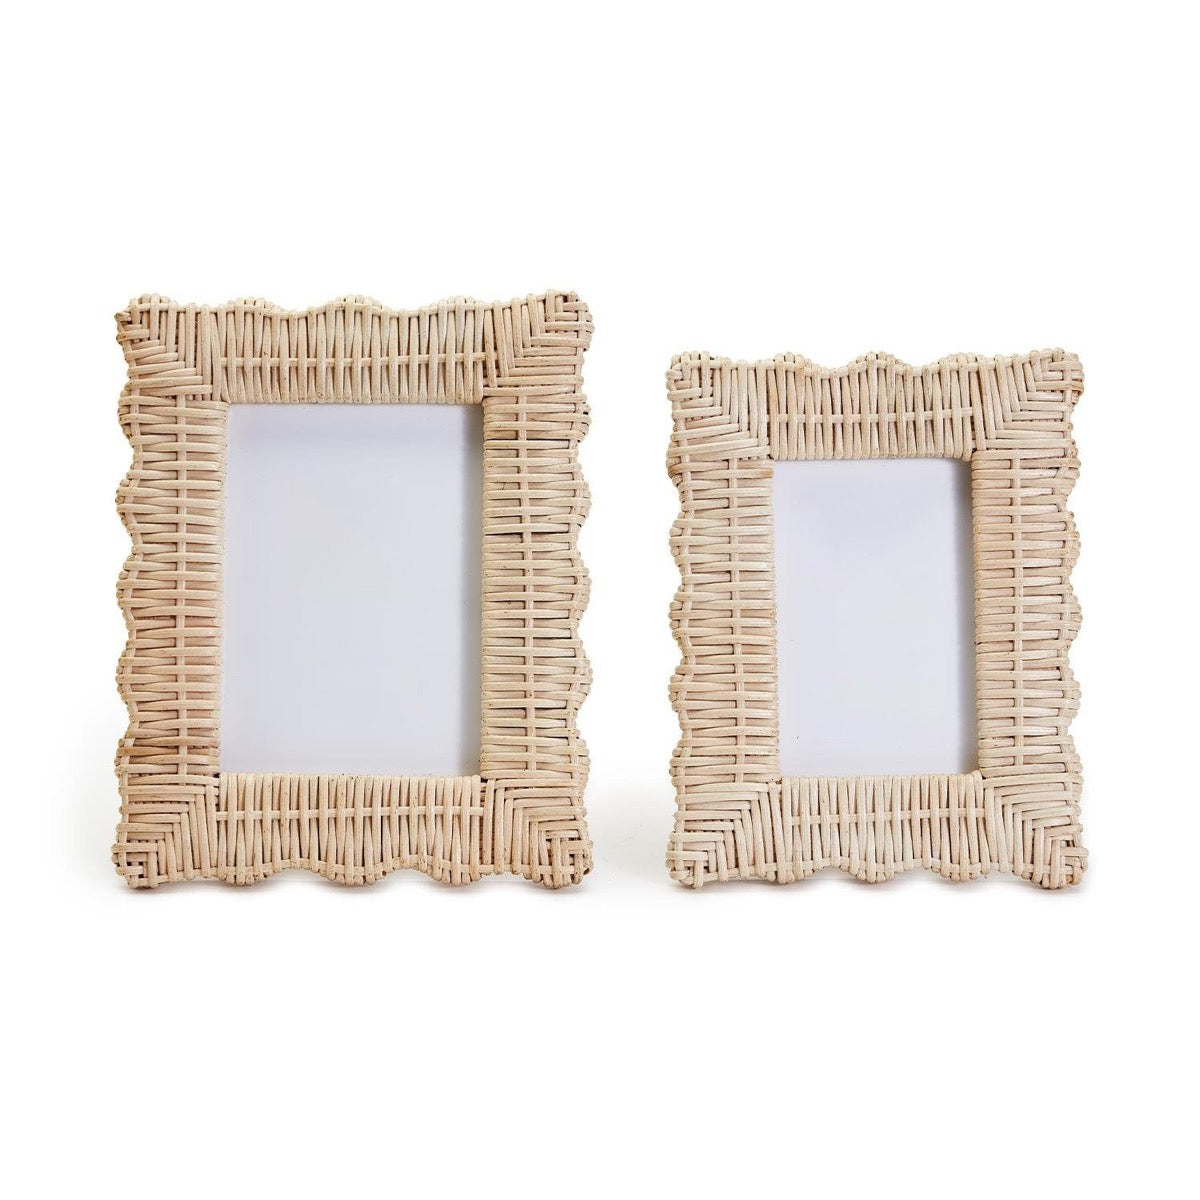 Scalloped Wicker Photo Frame Objects & Accents 